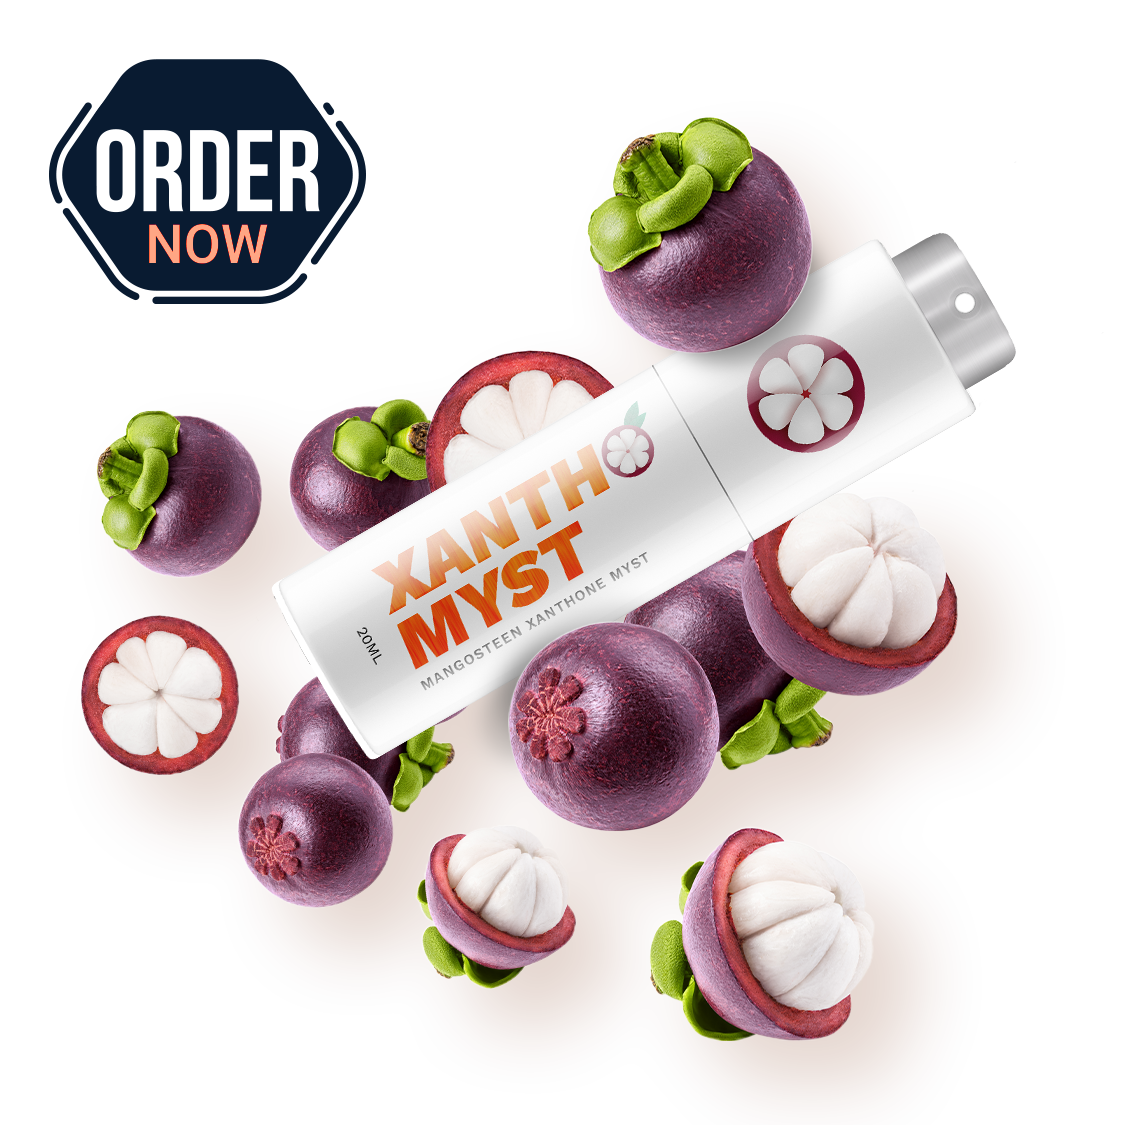 Mangosteen based product called Xanthomyst Allen TX